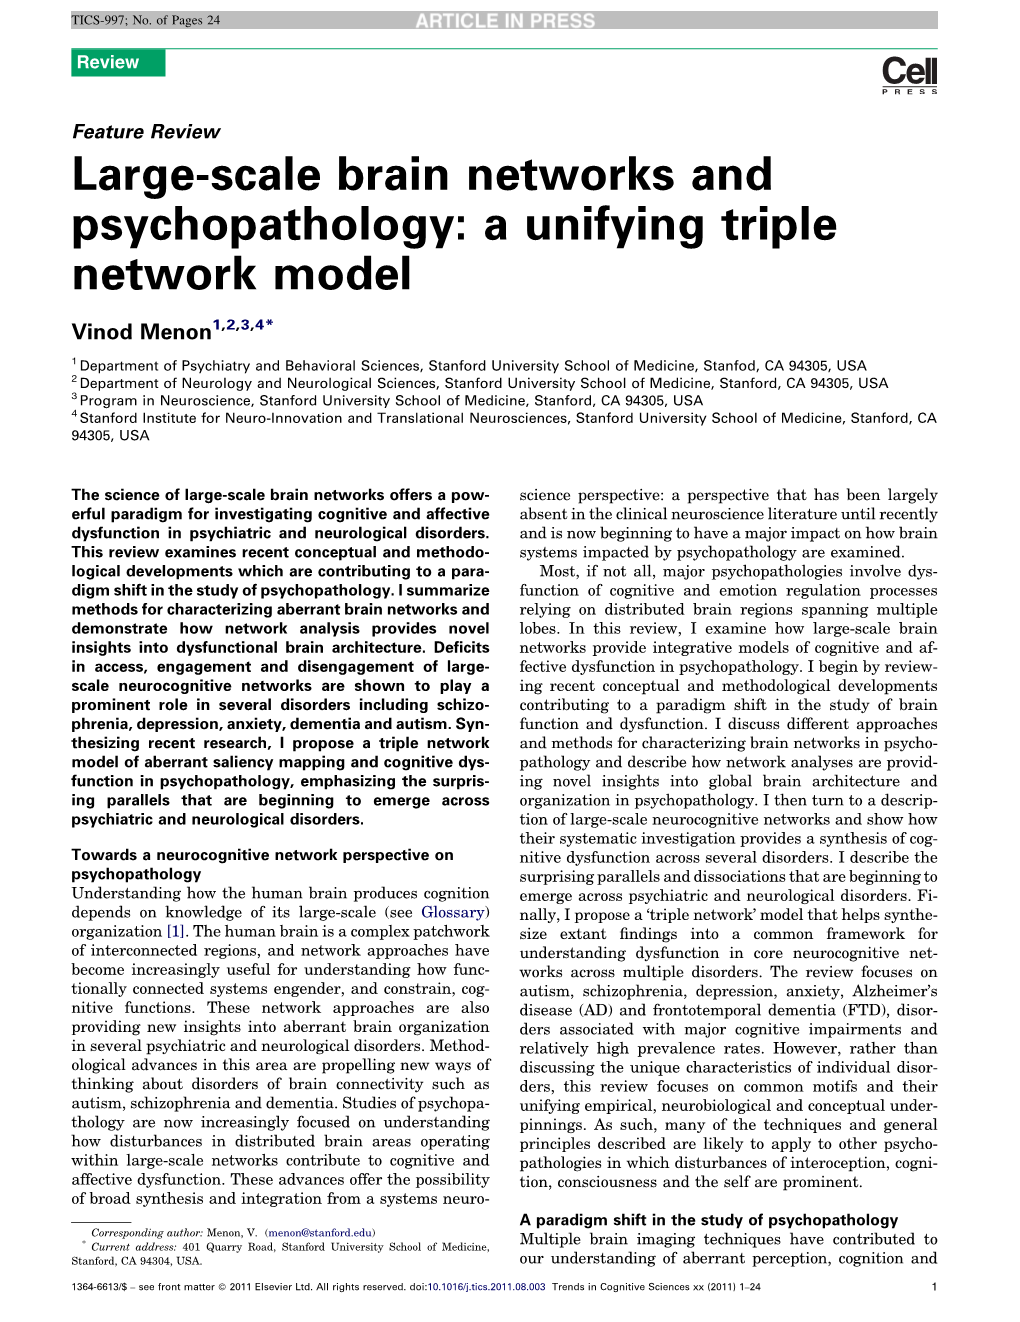 Large-Scale Brain Networks and Psychopathology: a Unifying Triple Network Model